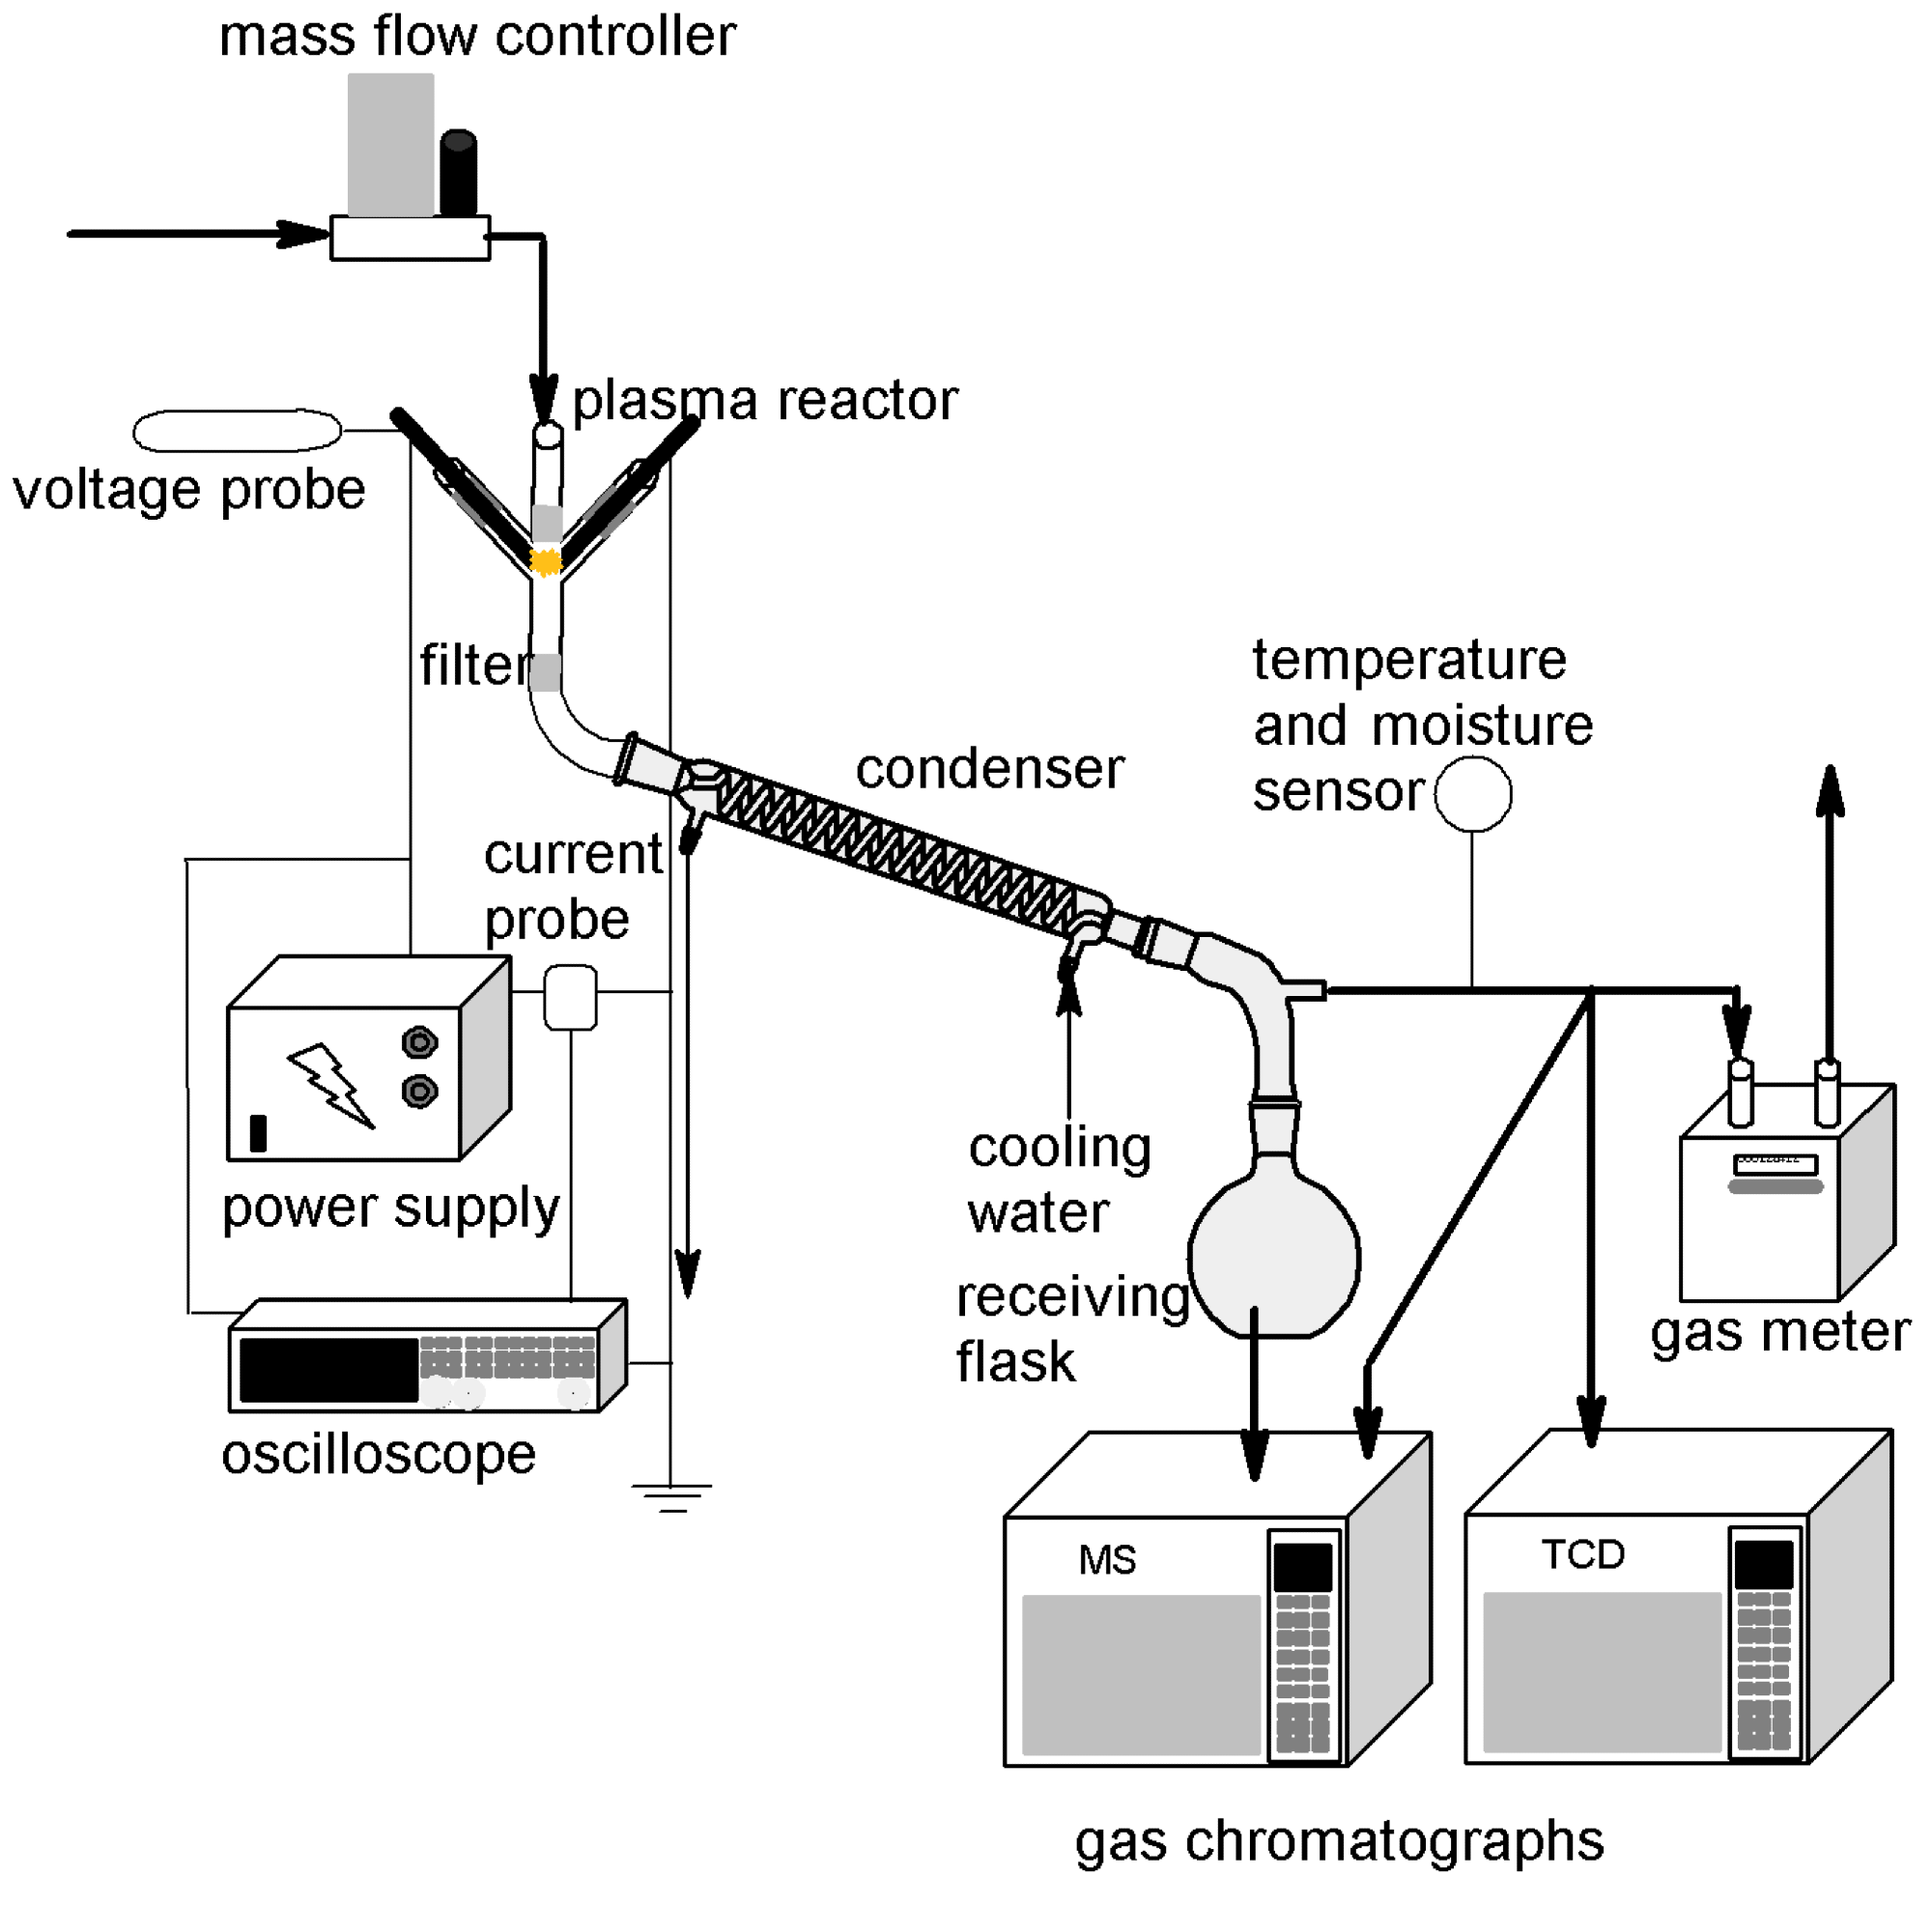 The scheme of the apparatus.